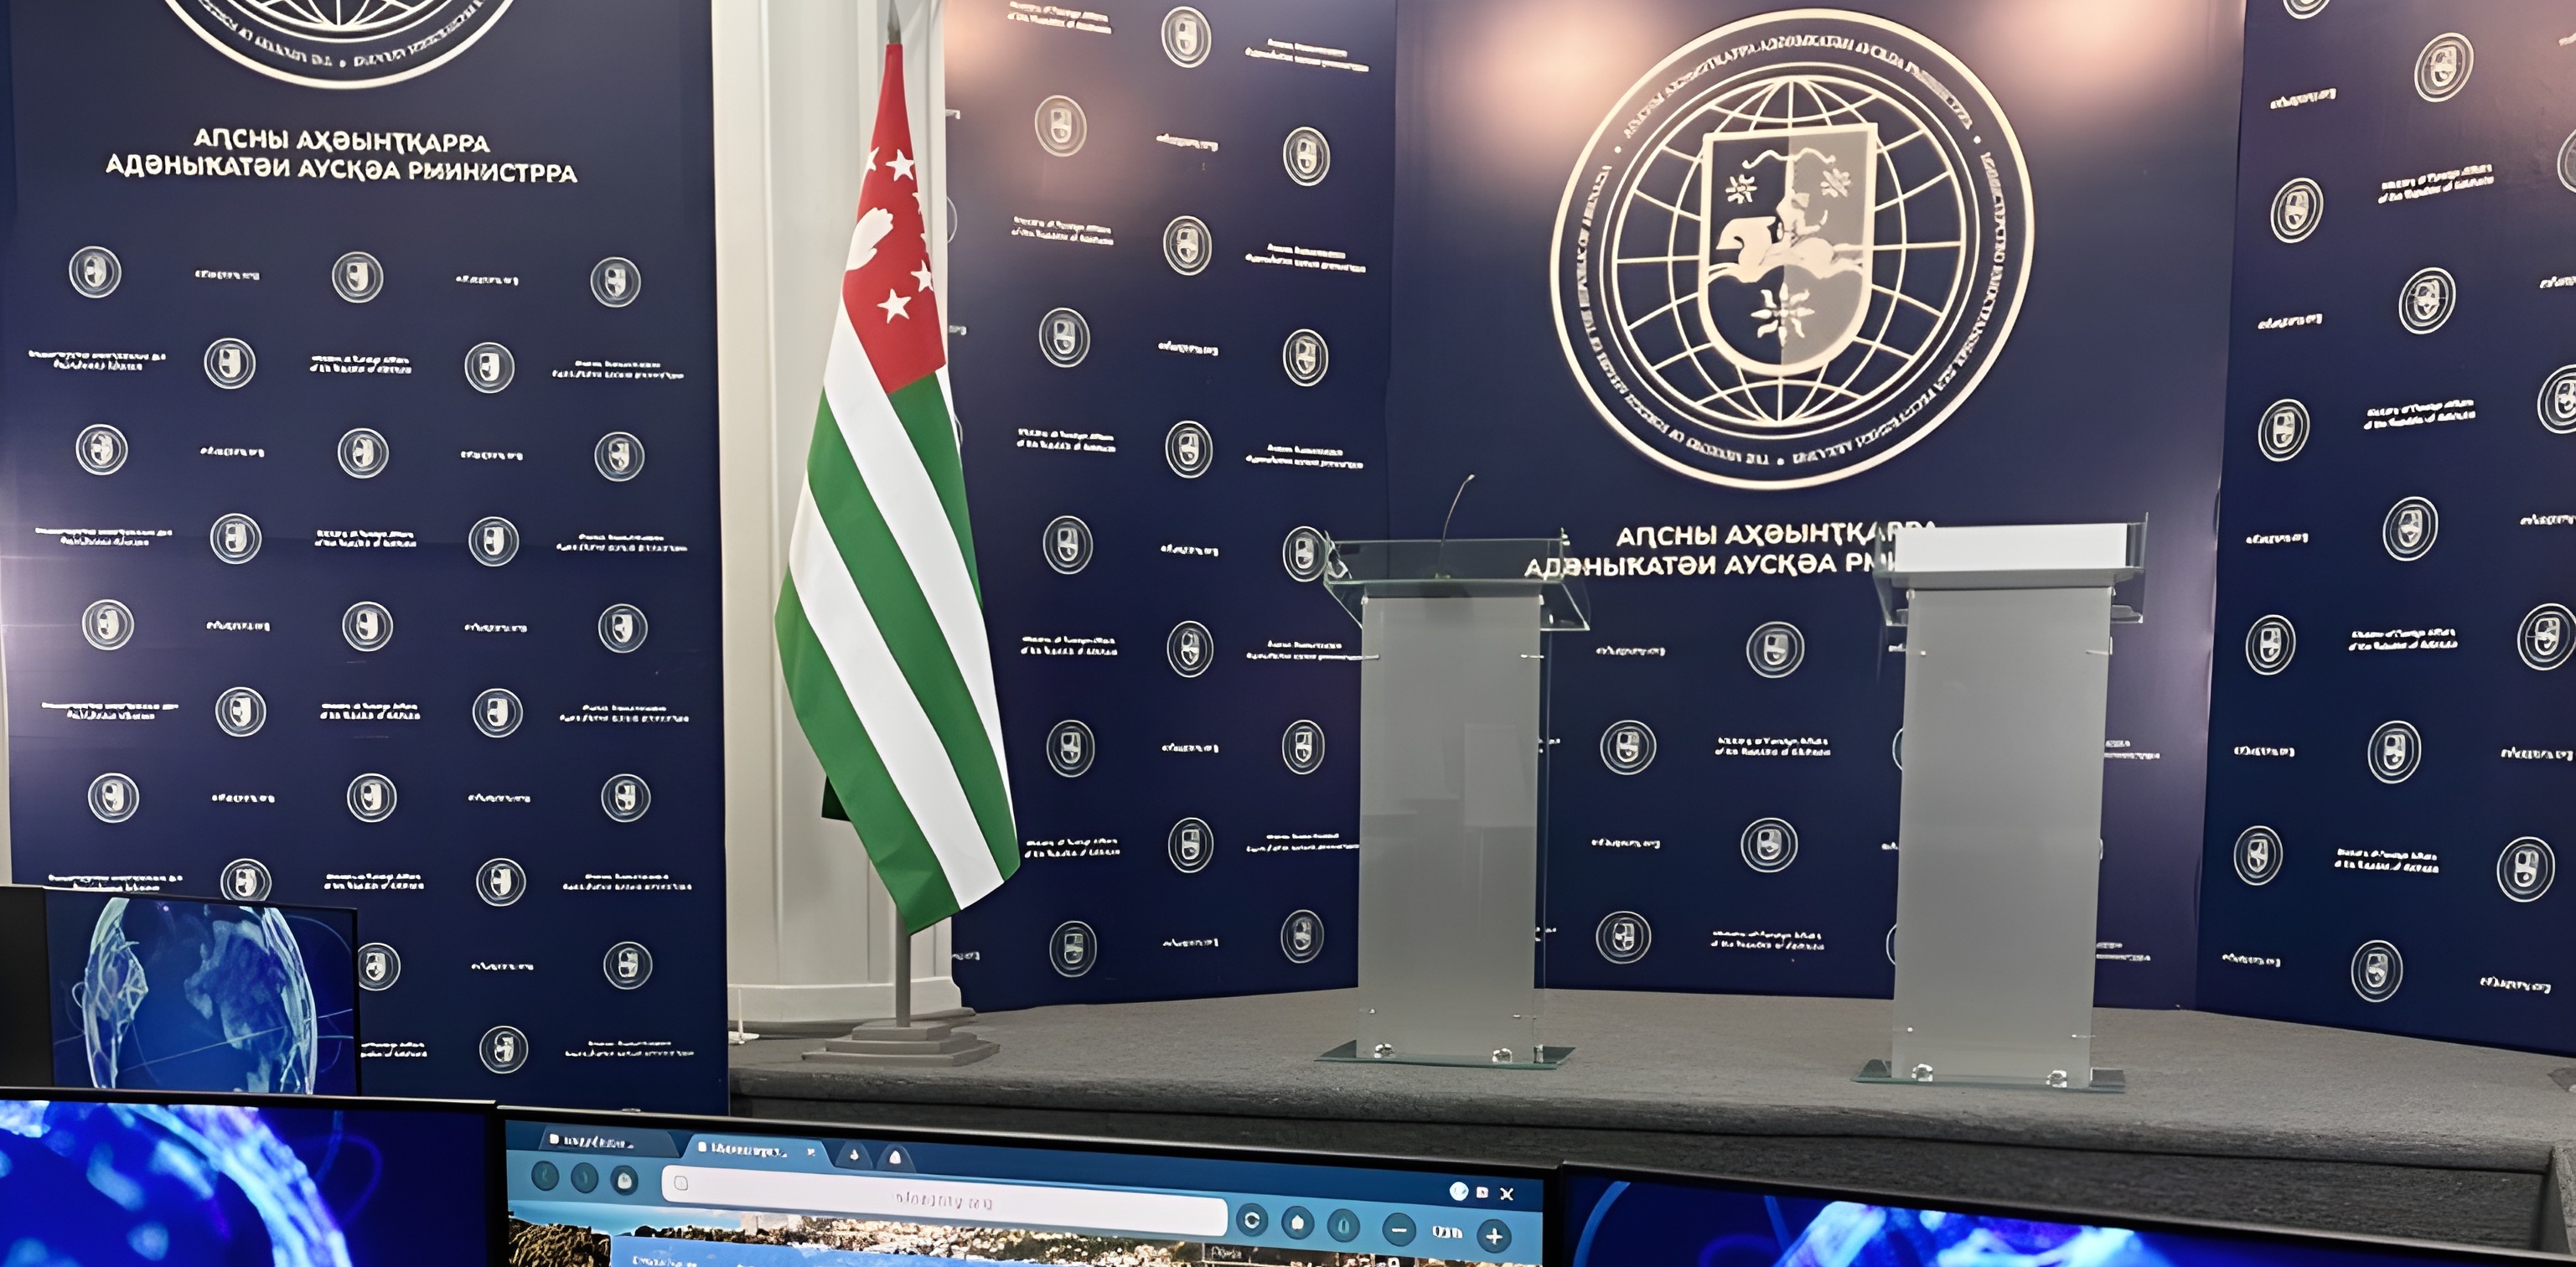 On March 29, the opening of the multifunctional Media Center of the MFA of Abkhazia took place.